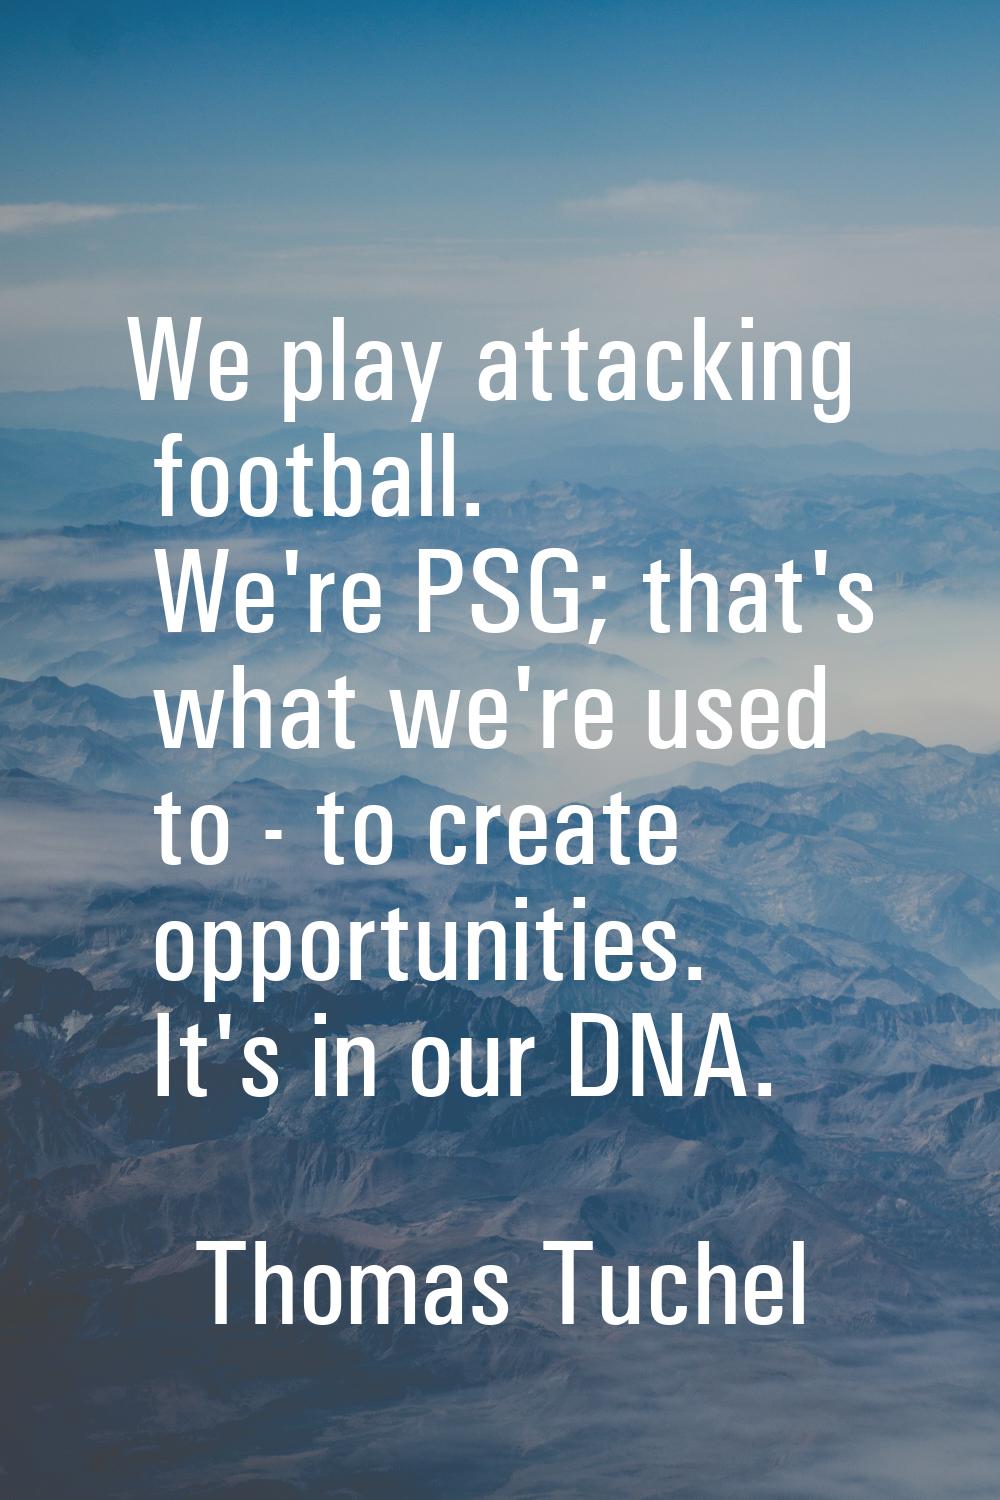 We play attacking football. We're PSG; that's what we're used to - to create opportunities. It's in